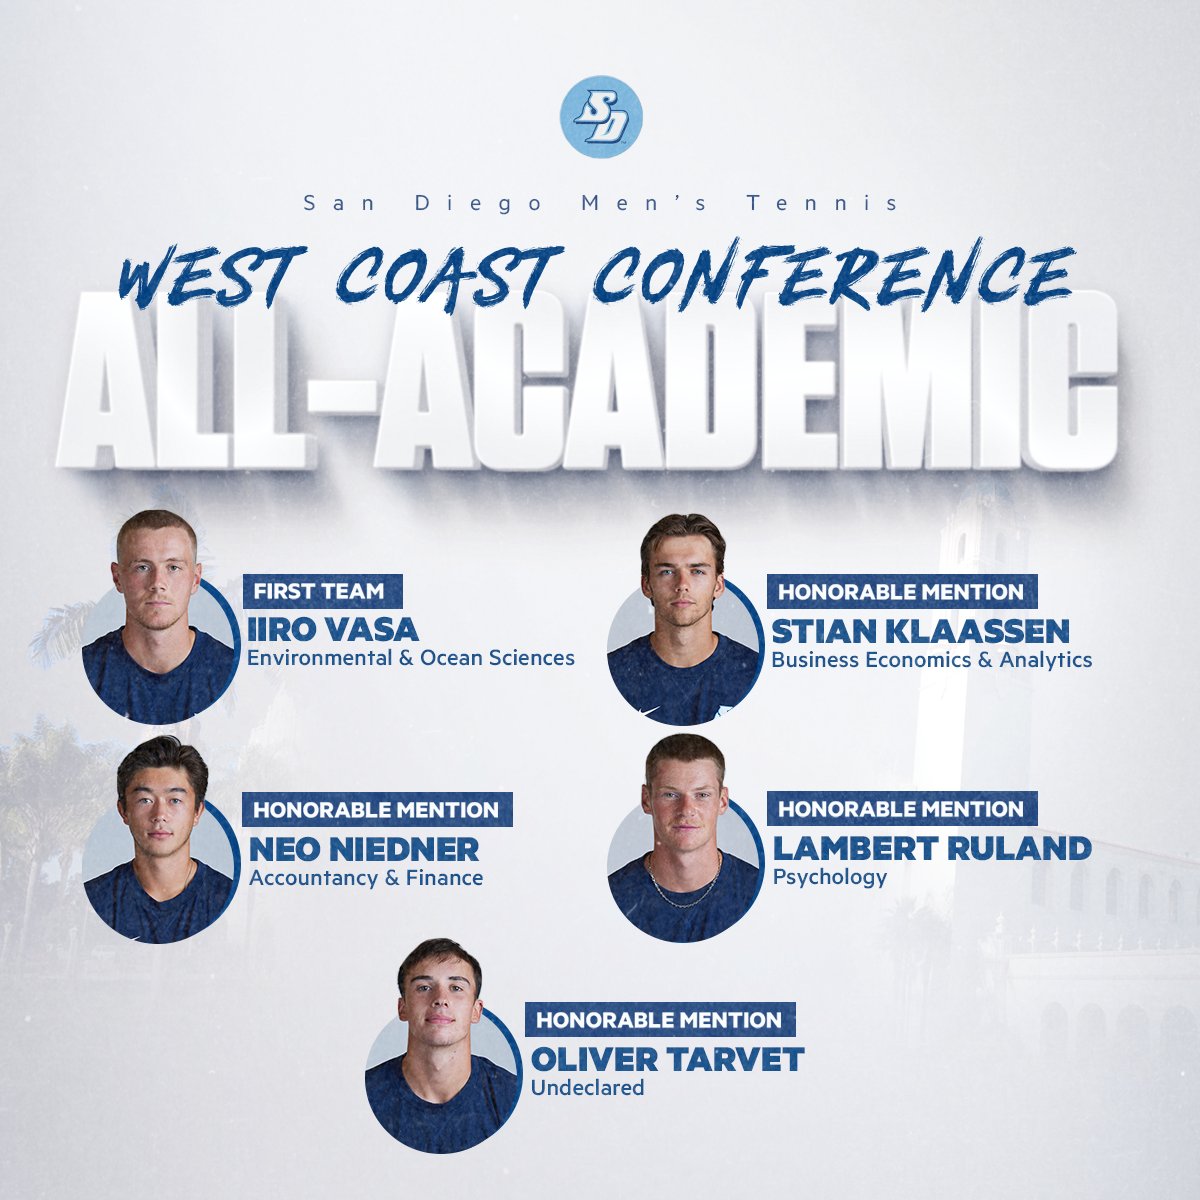 Shined on the court and in the classroom ✏️📕 Congratulations to our @WCCsports Academic honorees including Iiro Vasa who has been named to the First Team! 📰: bit.ly/3UvcTVd #GoToreros